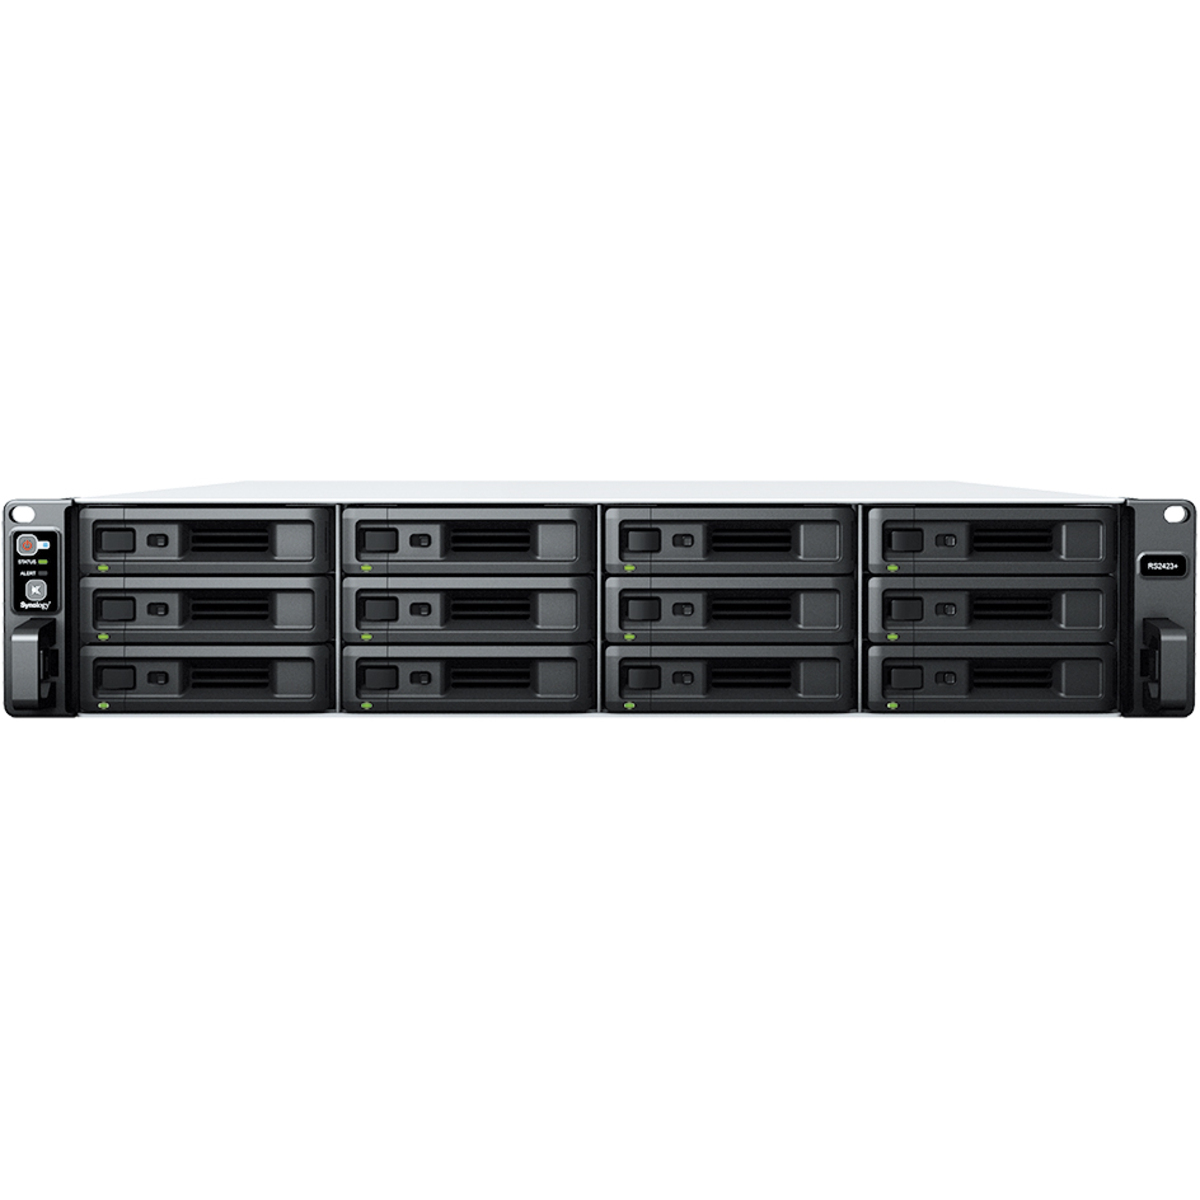 Synology RackStation RS2423+ 36tb 12-Bay RackMount Multimedia / Power User / Business NAS - Network Attached Storage Device 9x4tb Synology Plus Series HAT3300-4T 3.5 5400rmp SATA 6Gb/s HDD NAS Class Drives Installed - Burn-In Tested RackStation RS2423+